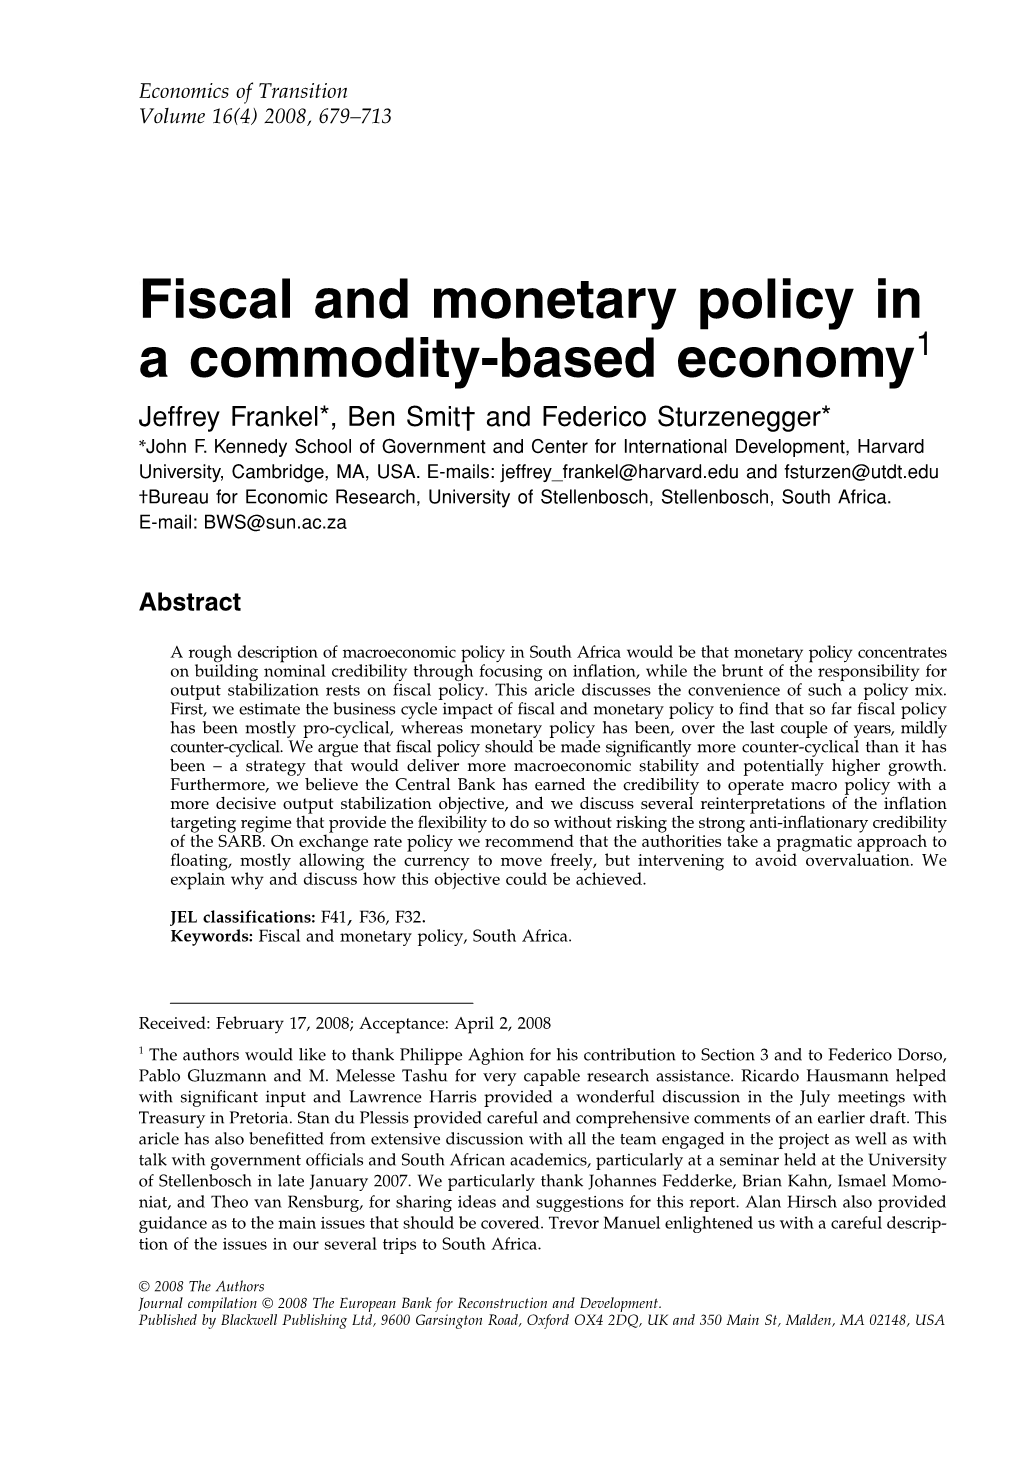 Fiscal and Monetary Policy in a Commodity-Based Economy1